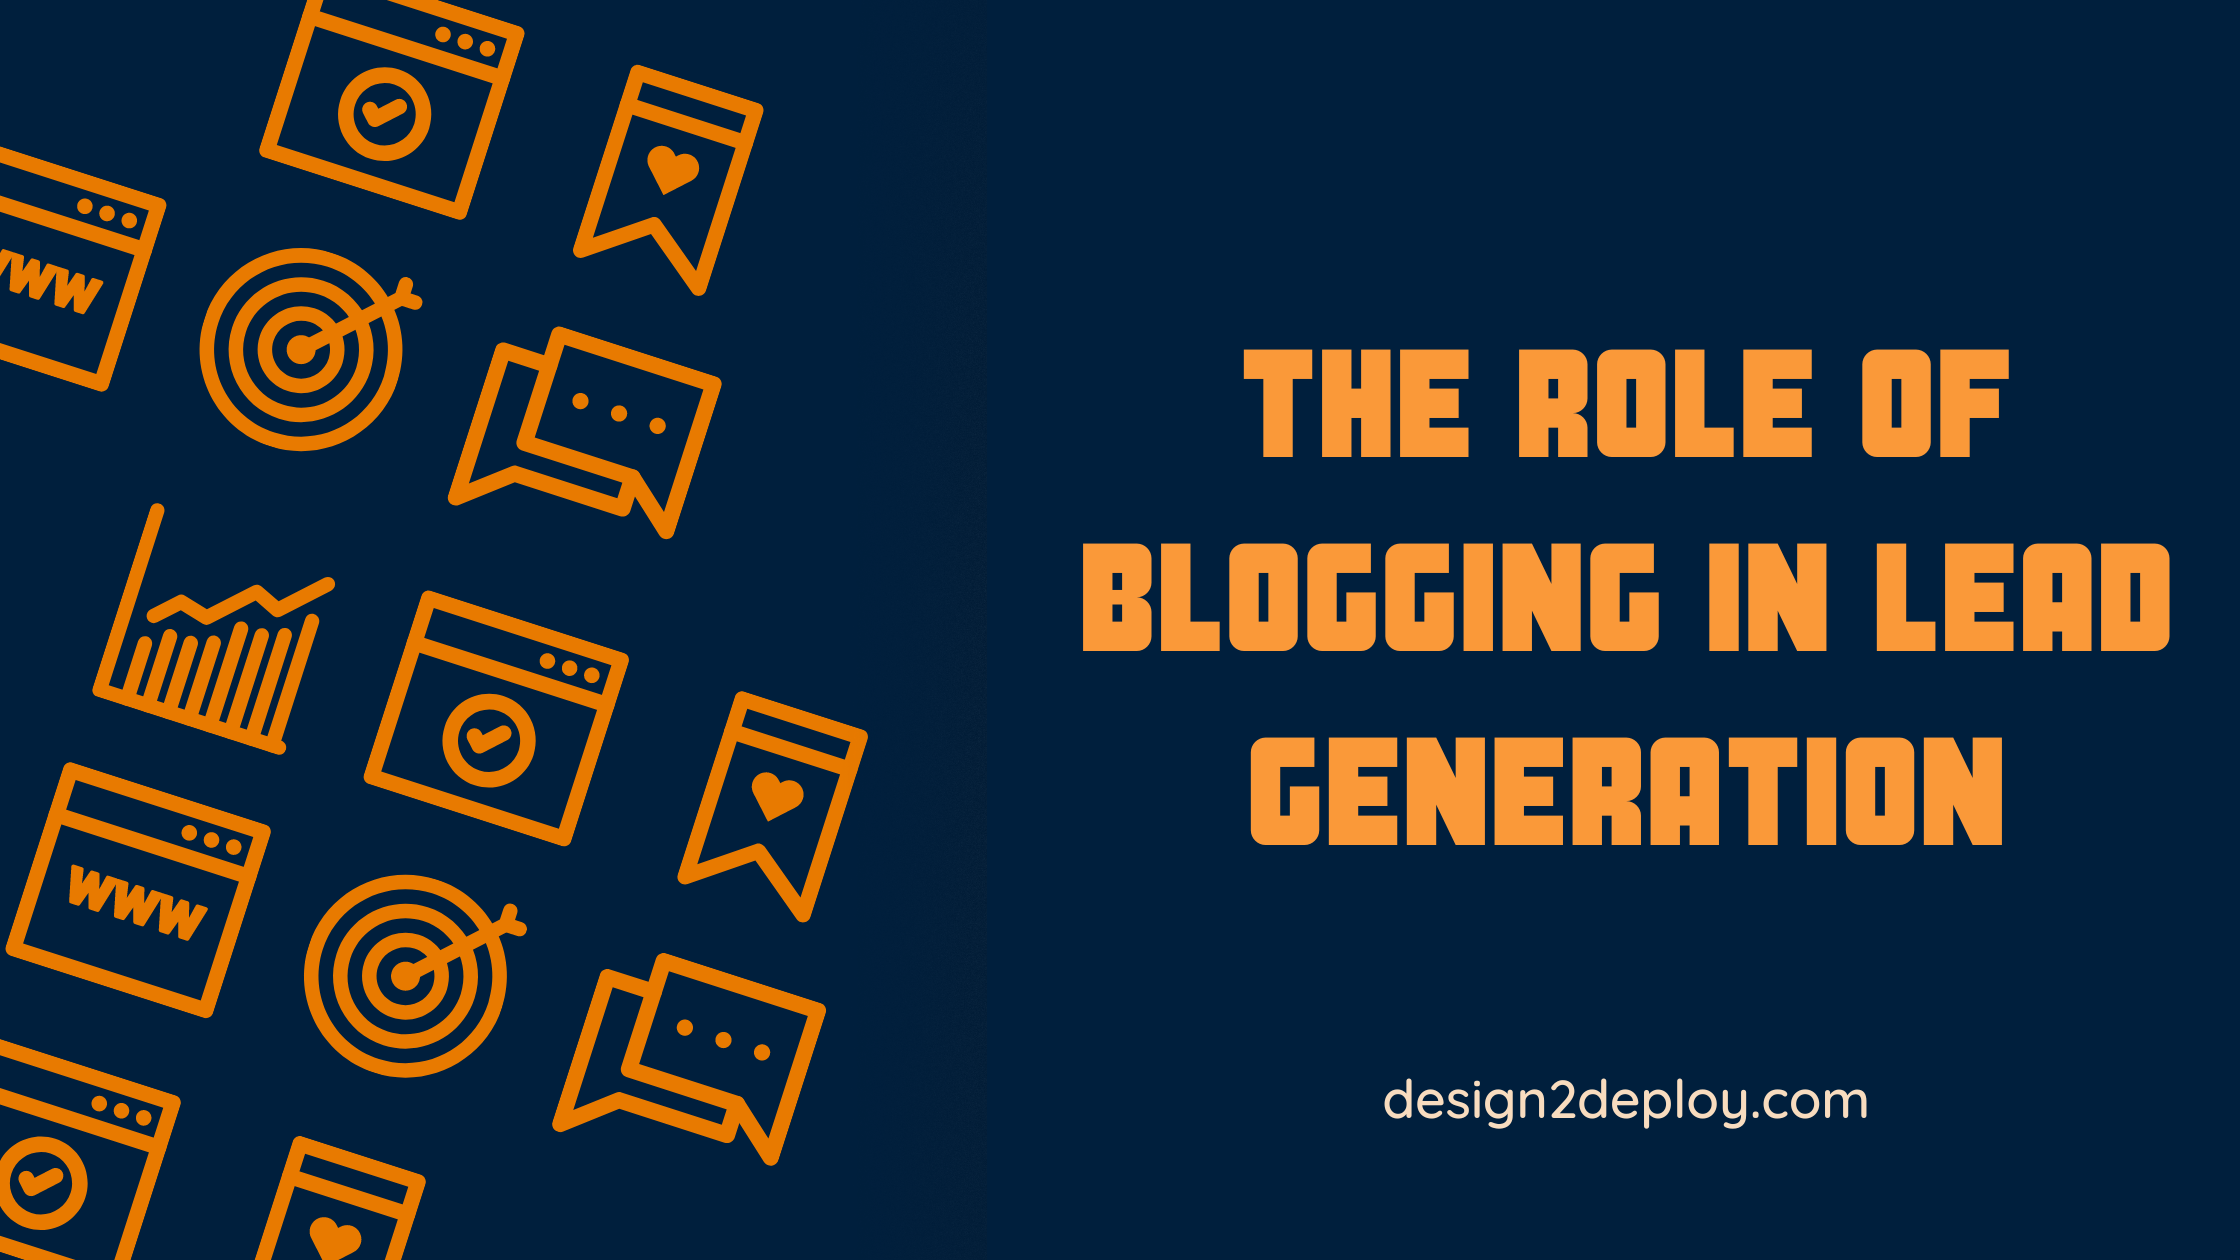 The Role of Blogging in Lead Generation